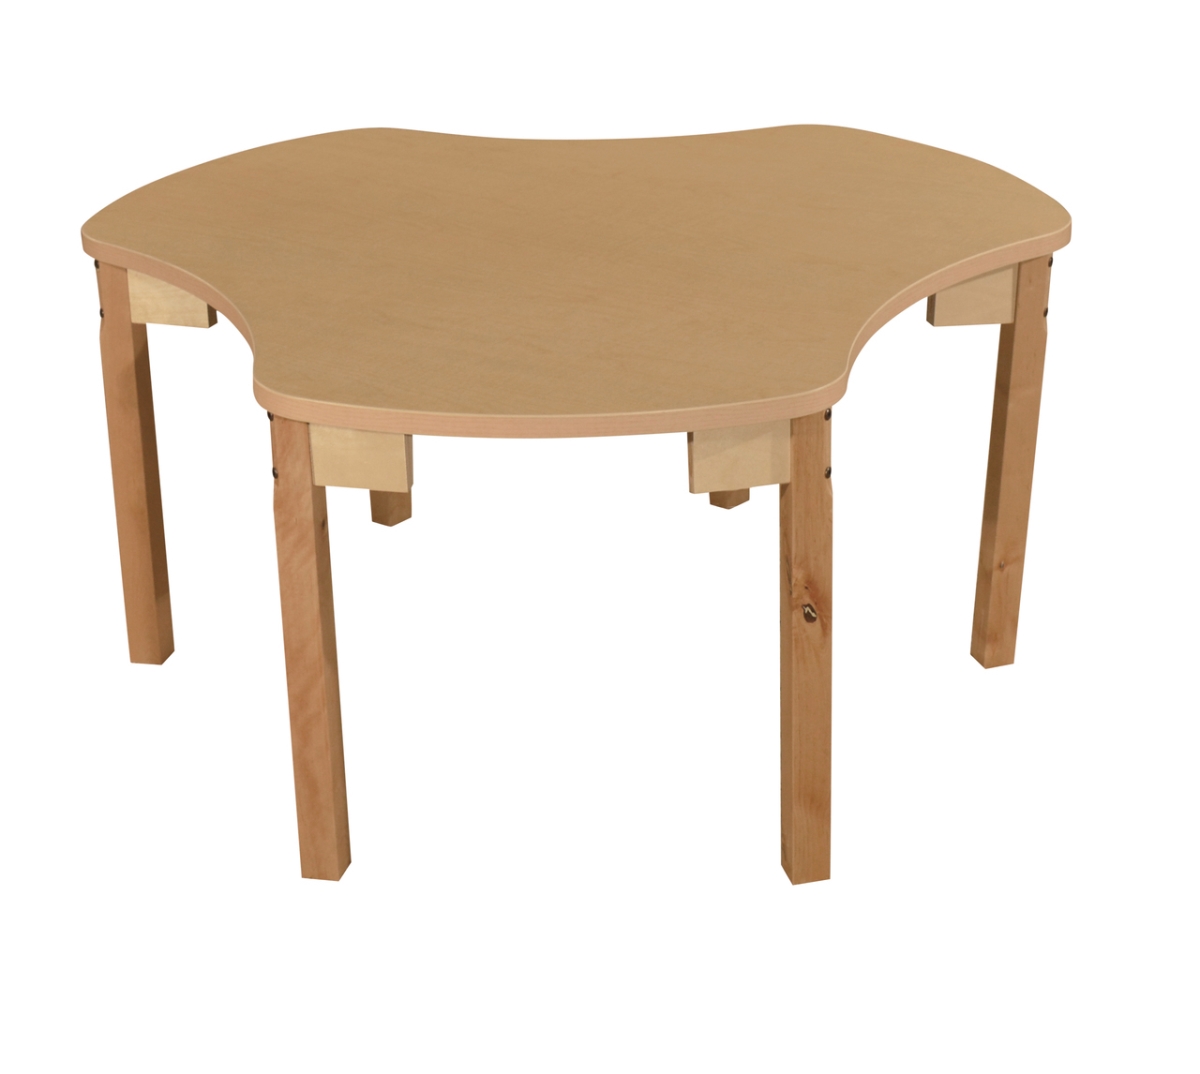 Picture of Wood Designs HPL4448C26 44 x 48 in. Synergy Union High Pressure Laminate Group Table with Hardwood Legs- 26 in.